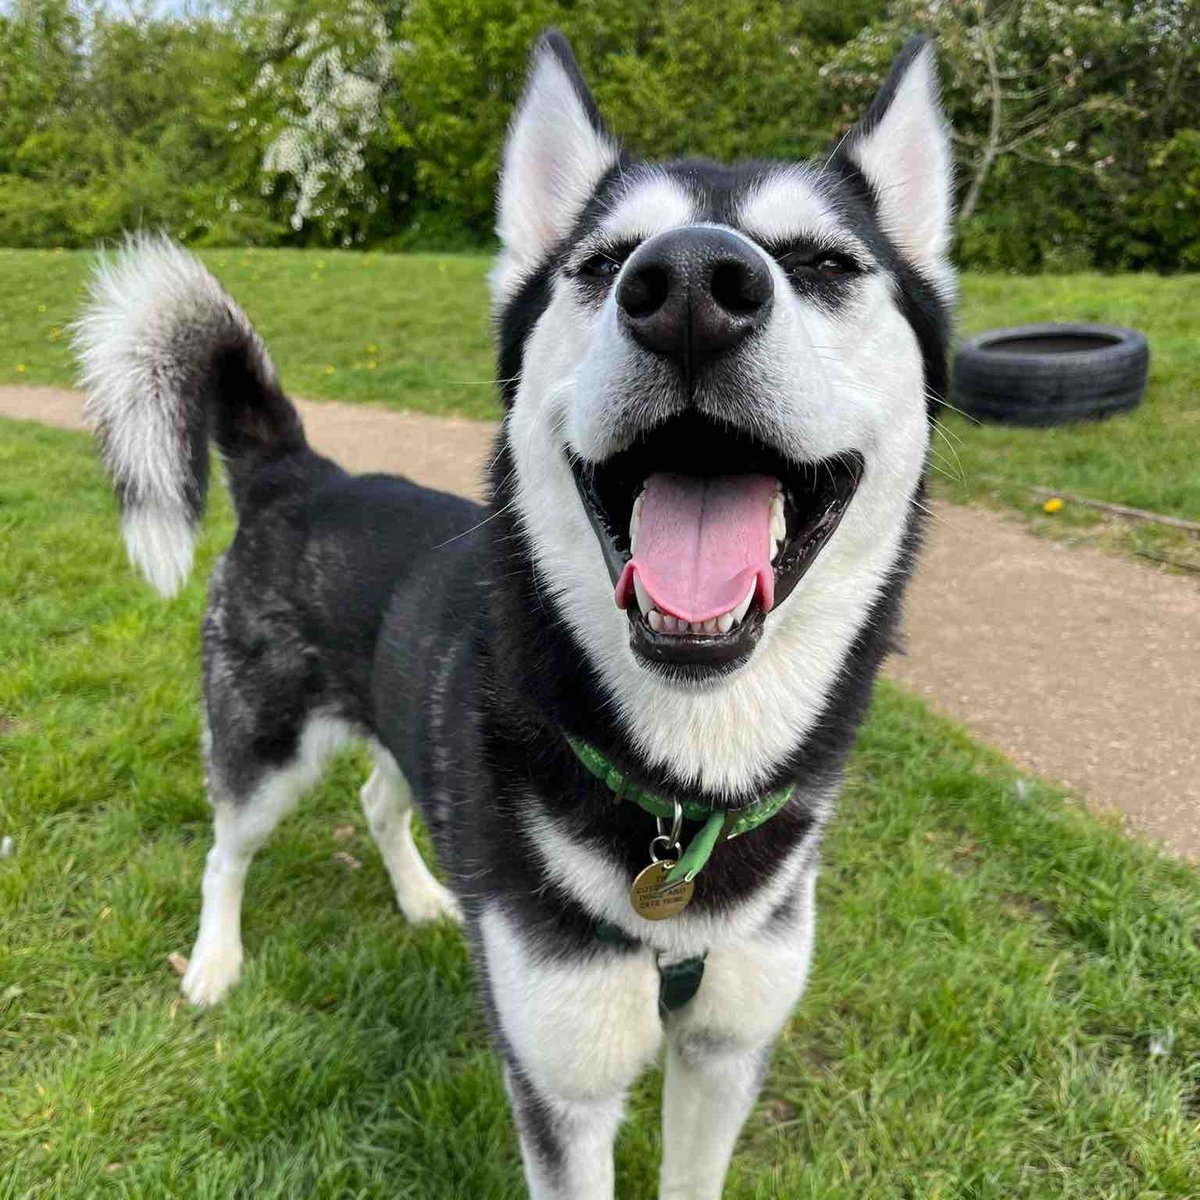 Do you think Odin knows how handsome he is?🥰 #CotsDogsCats #Husky #TongueOutTuesday